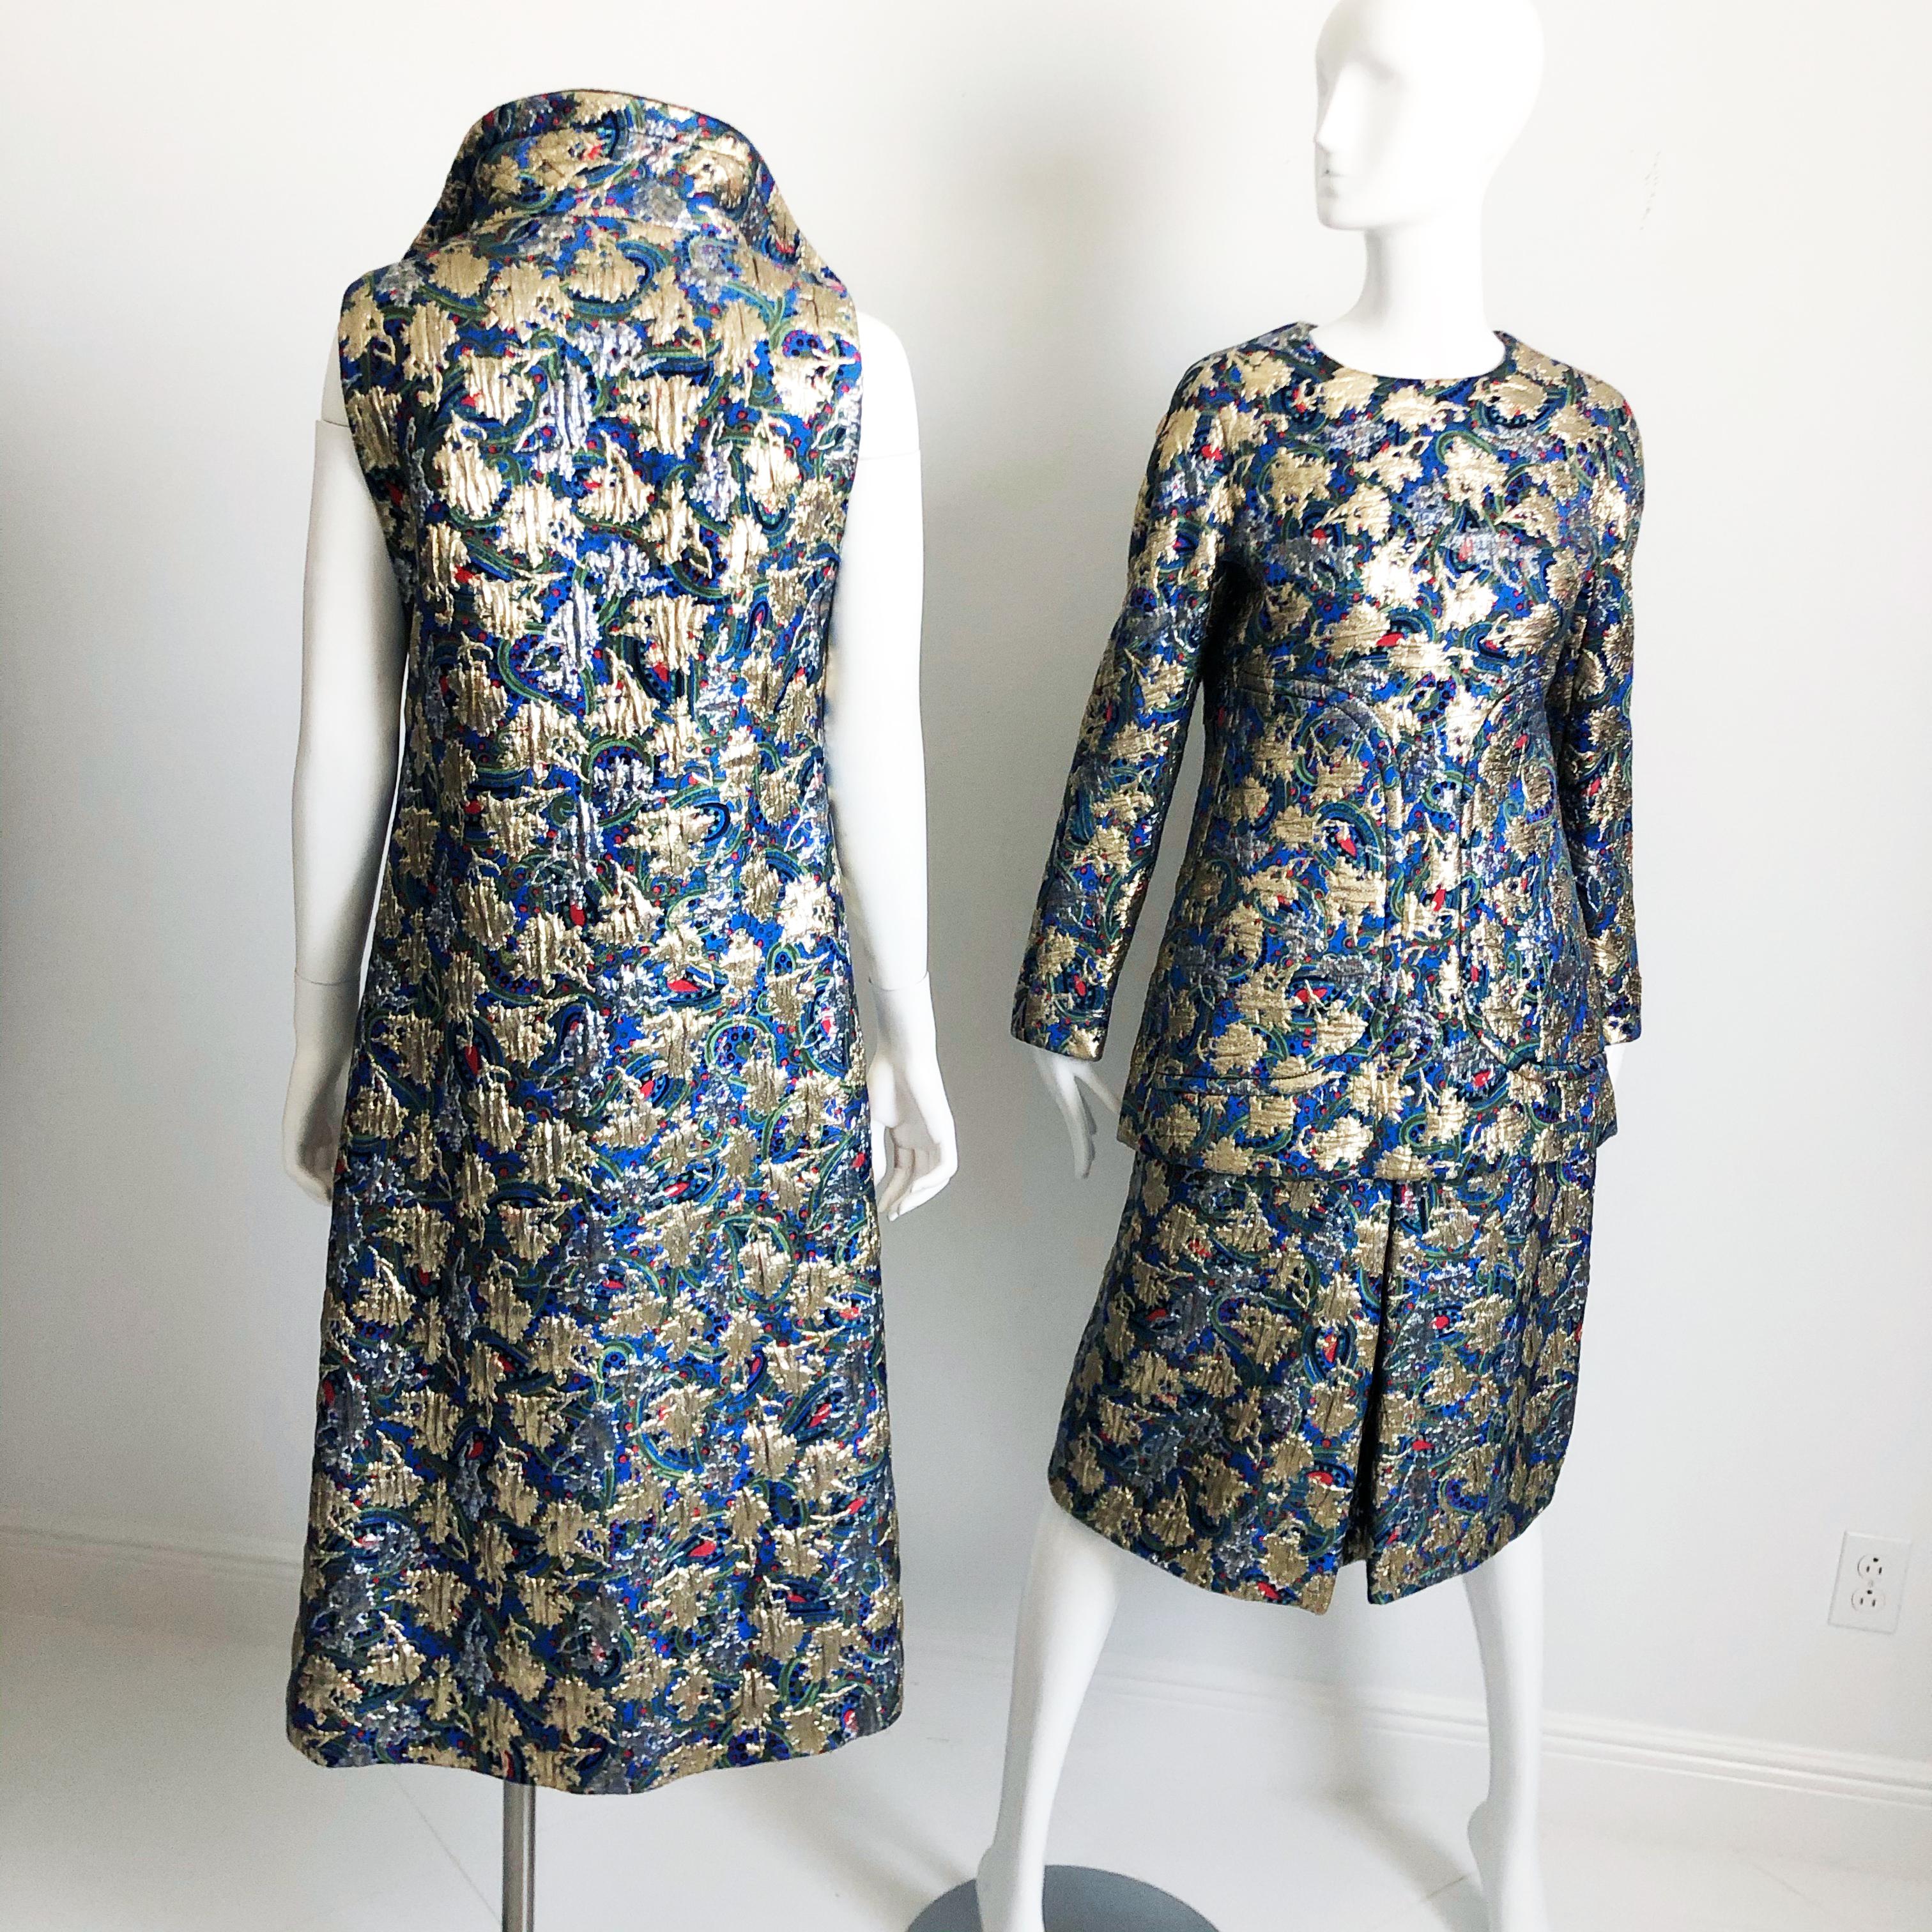 Galanos Metallic Brocade Suit 3pc Top, Long Vest and Skirt Vintage 60s Retro  For Sale 2